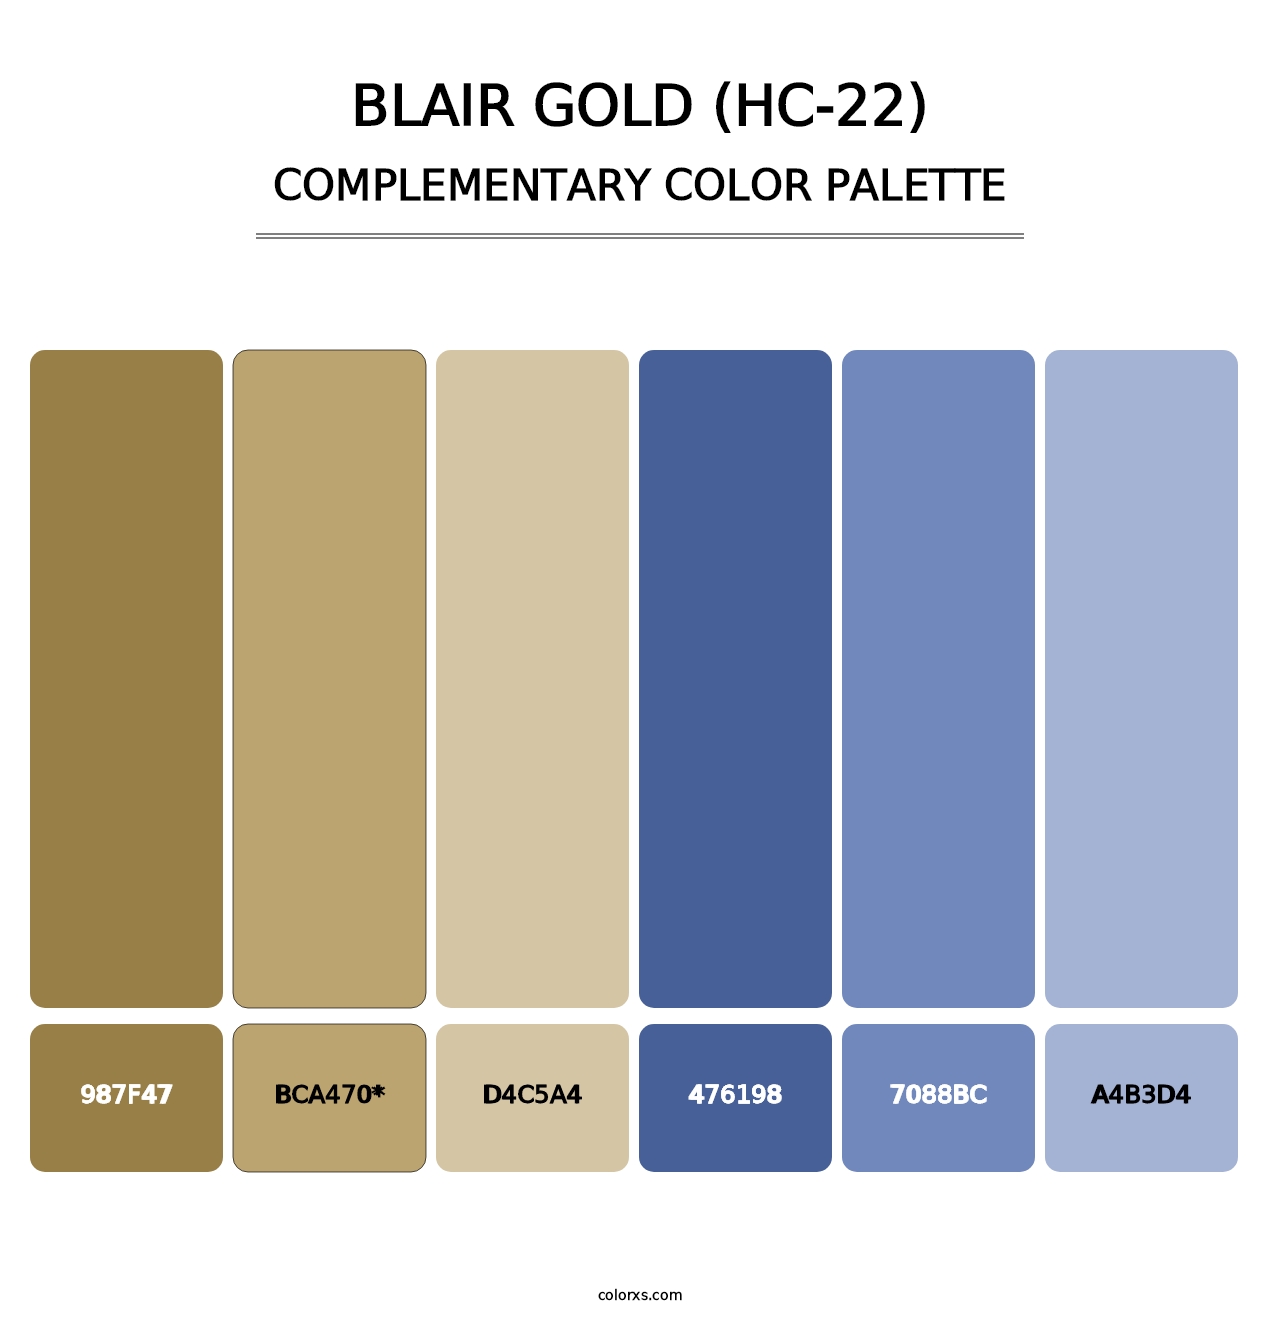 Blair Gold (HC-22) - Complementary Color Palette